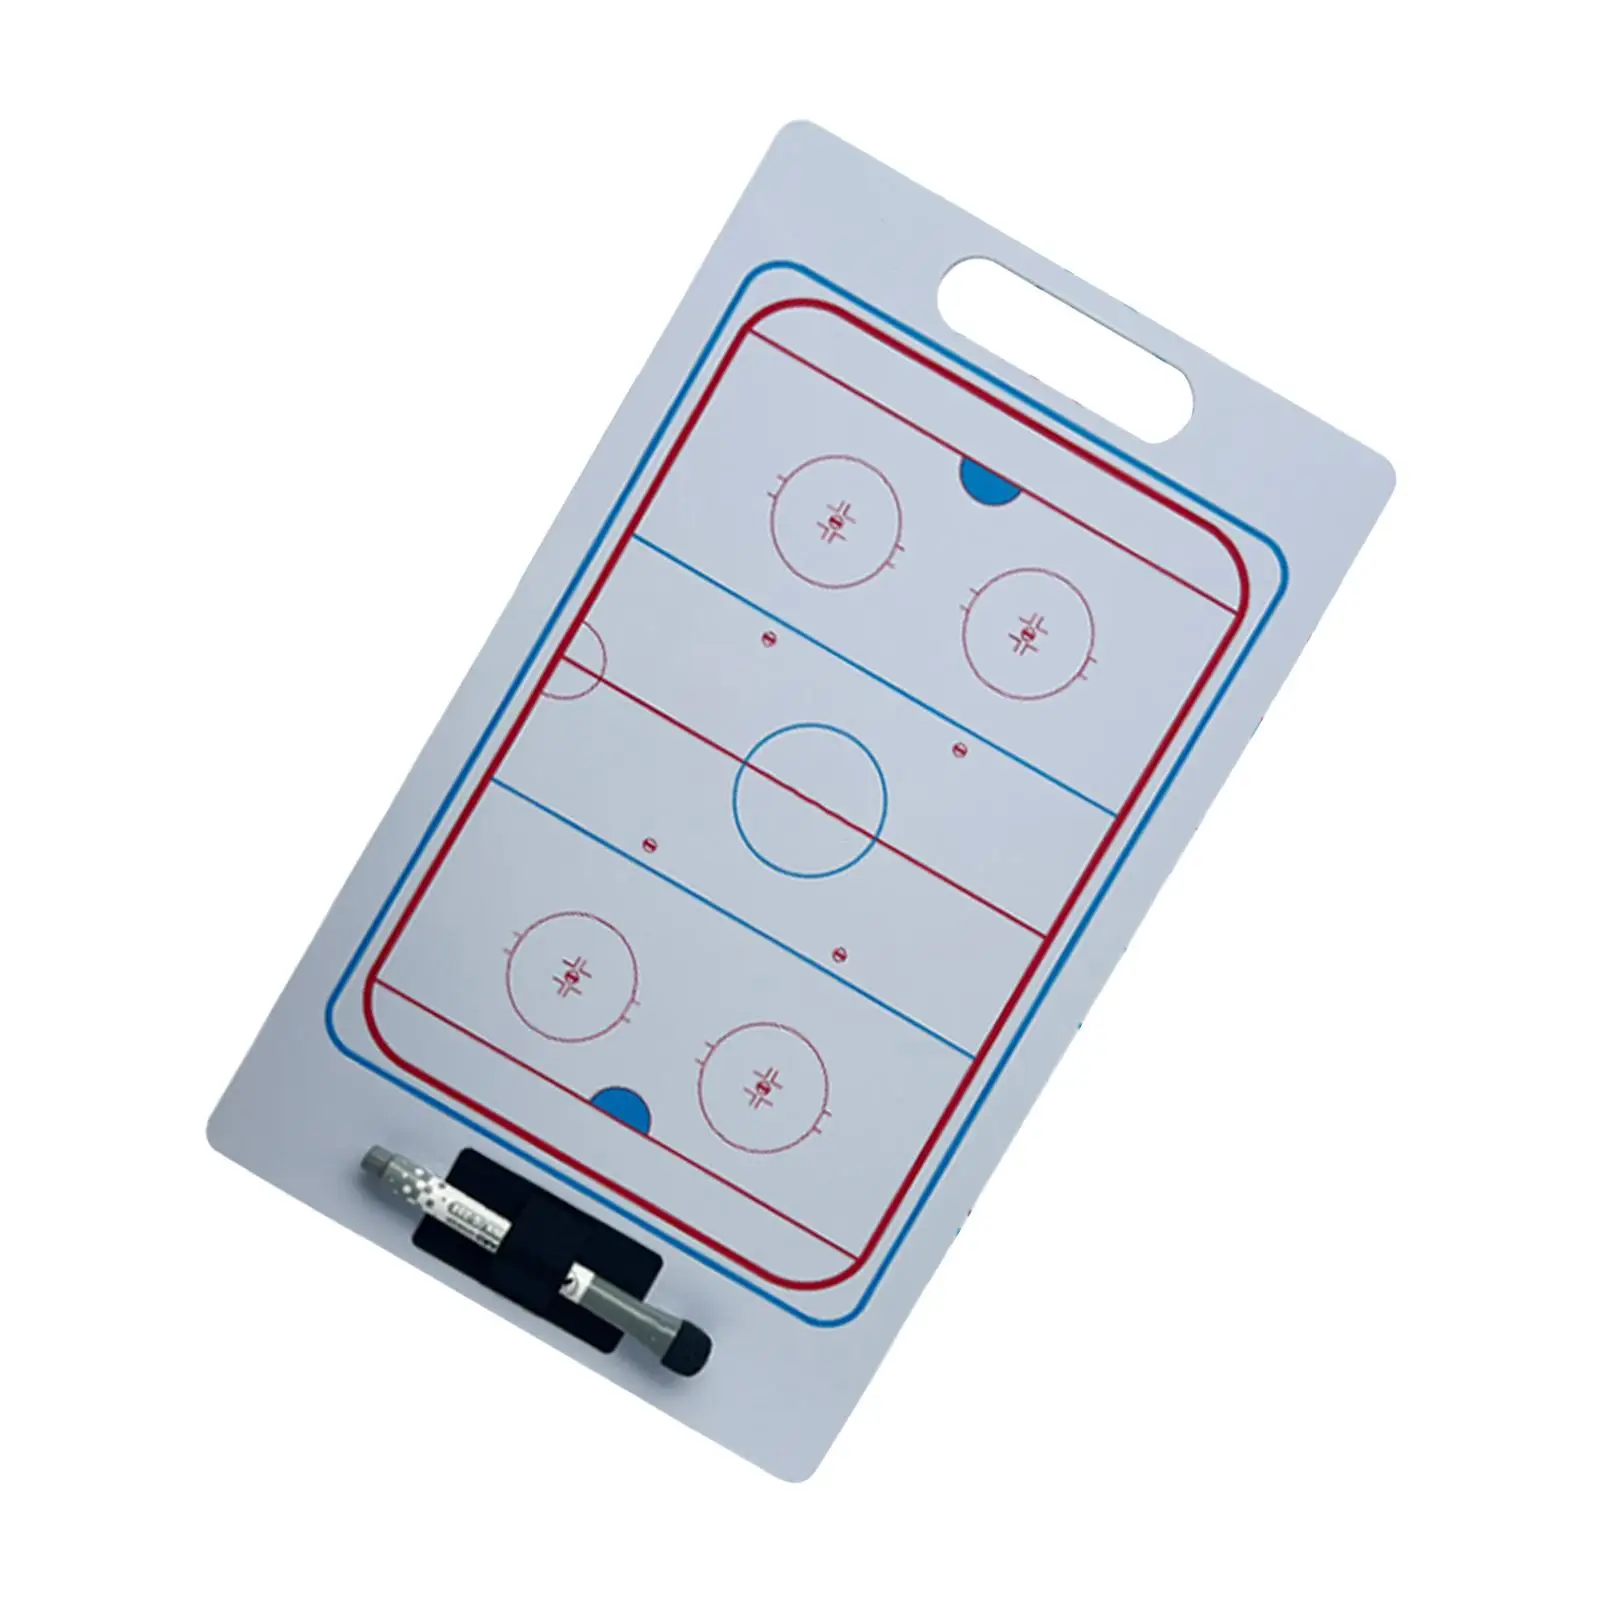 Ice Hockey Tactic Coaching Boards Training Aid Soccer Coaches Practice Board Training Equipment Strategy Tactic Clipboard